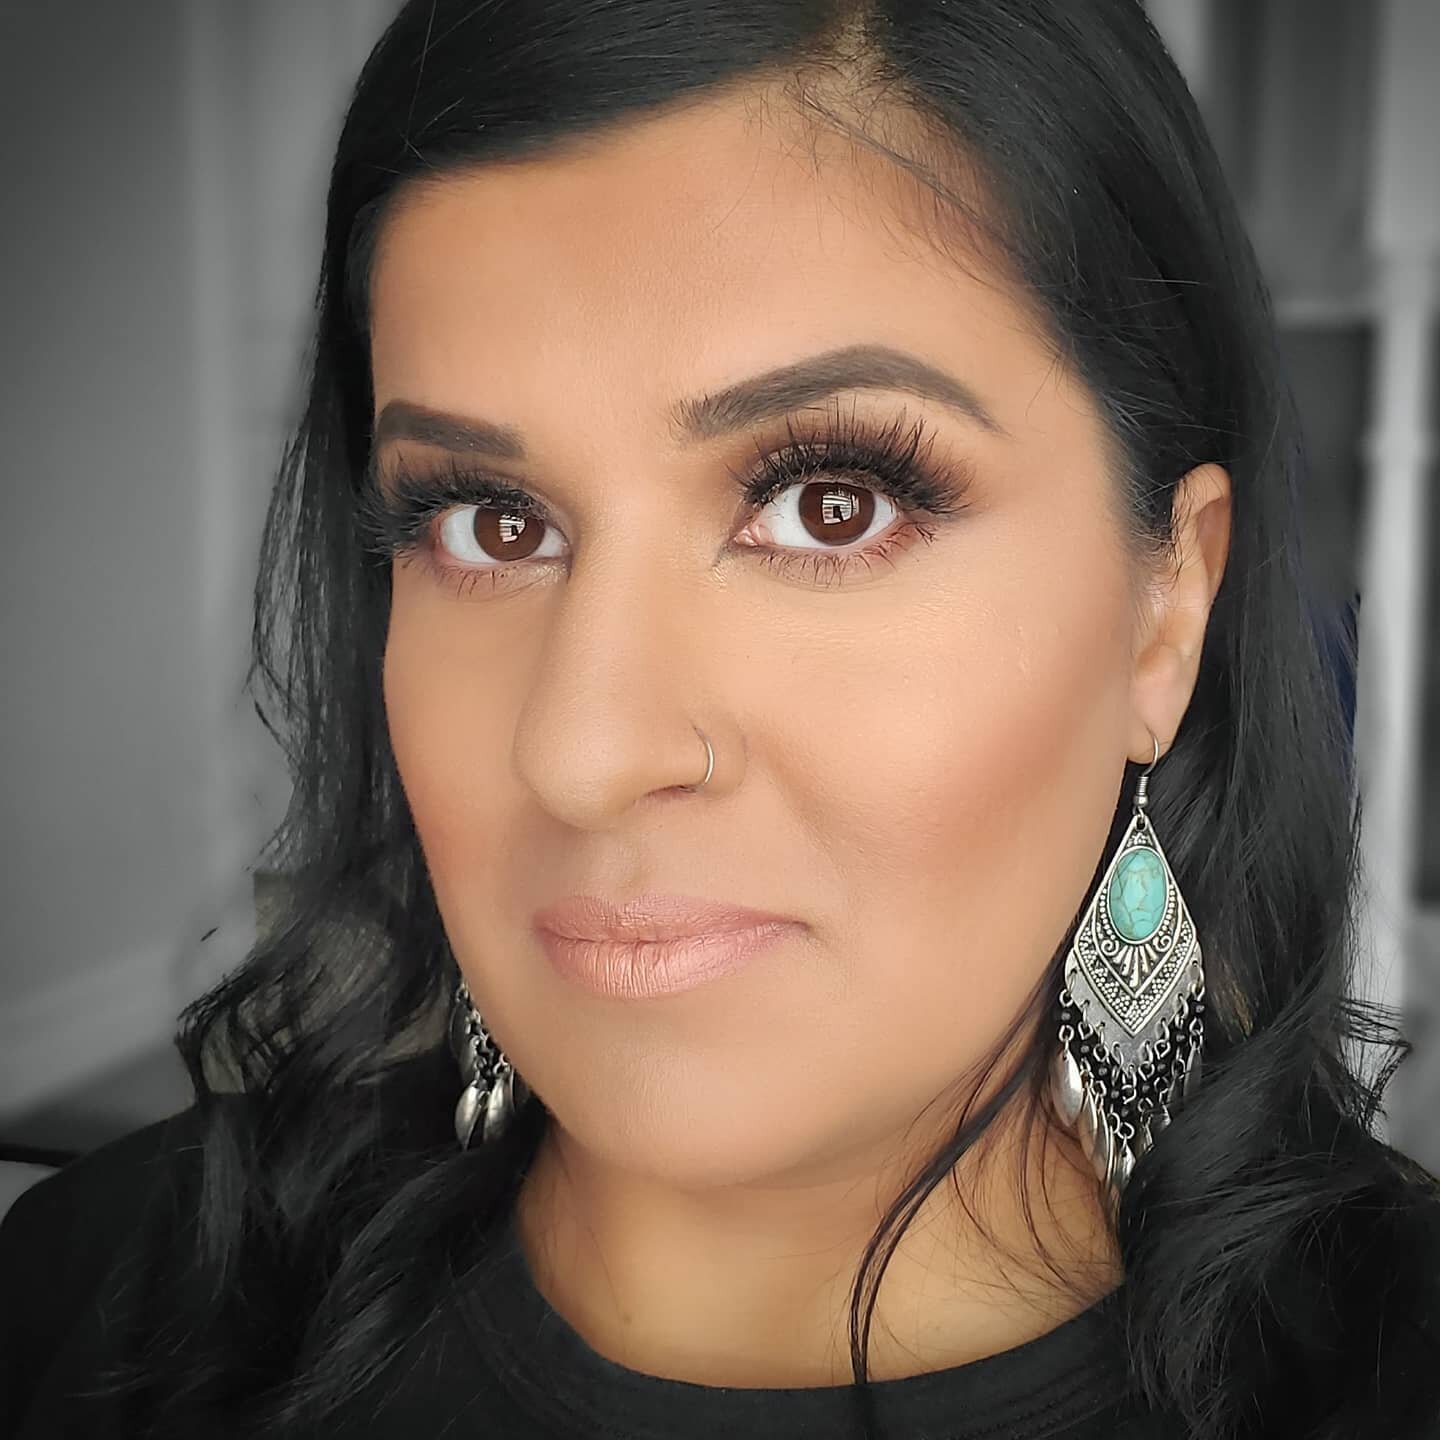 I often have nude lips when I do full glam. What is your favourite nude lip guys? 
Currently my go to is Blankety by @maccosmeticscanada 
#macgirl #sumayyaco #lashboss #isolation2020 #nudelipcolor